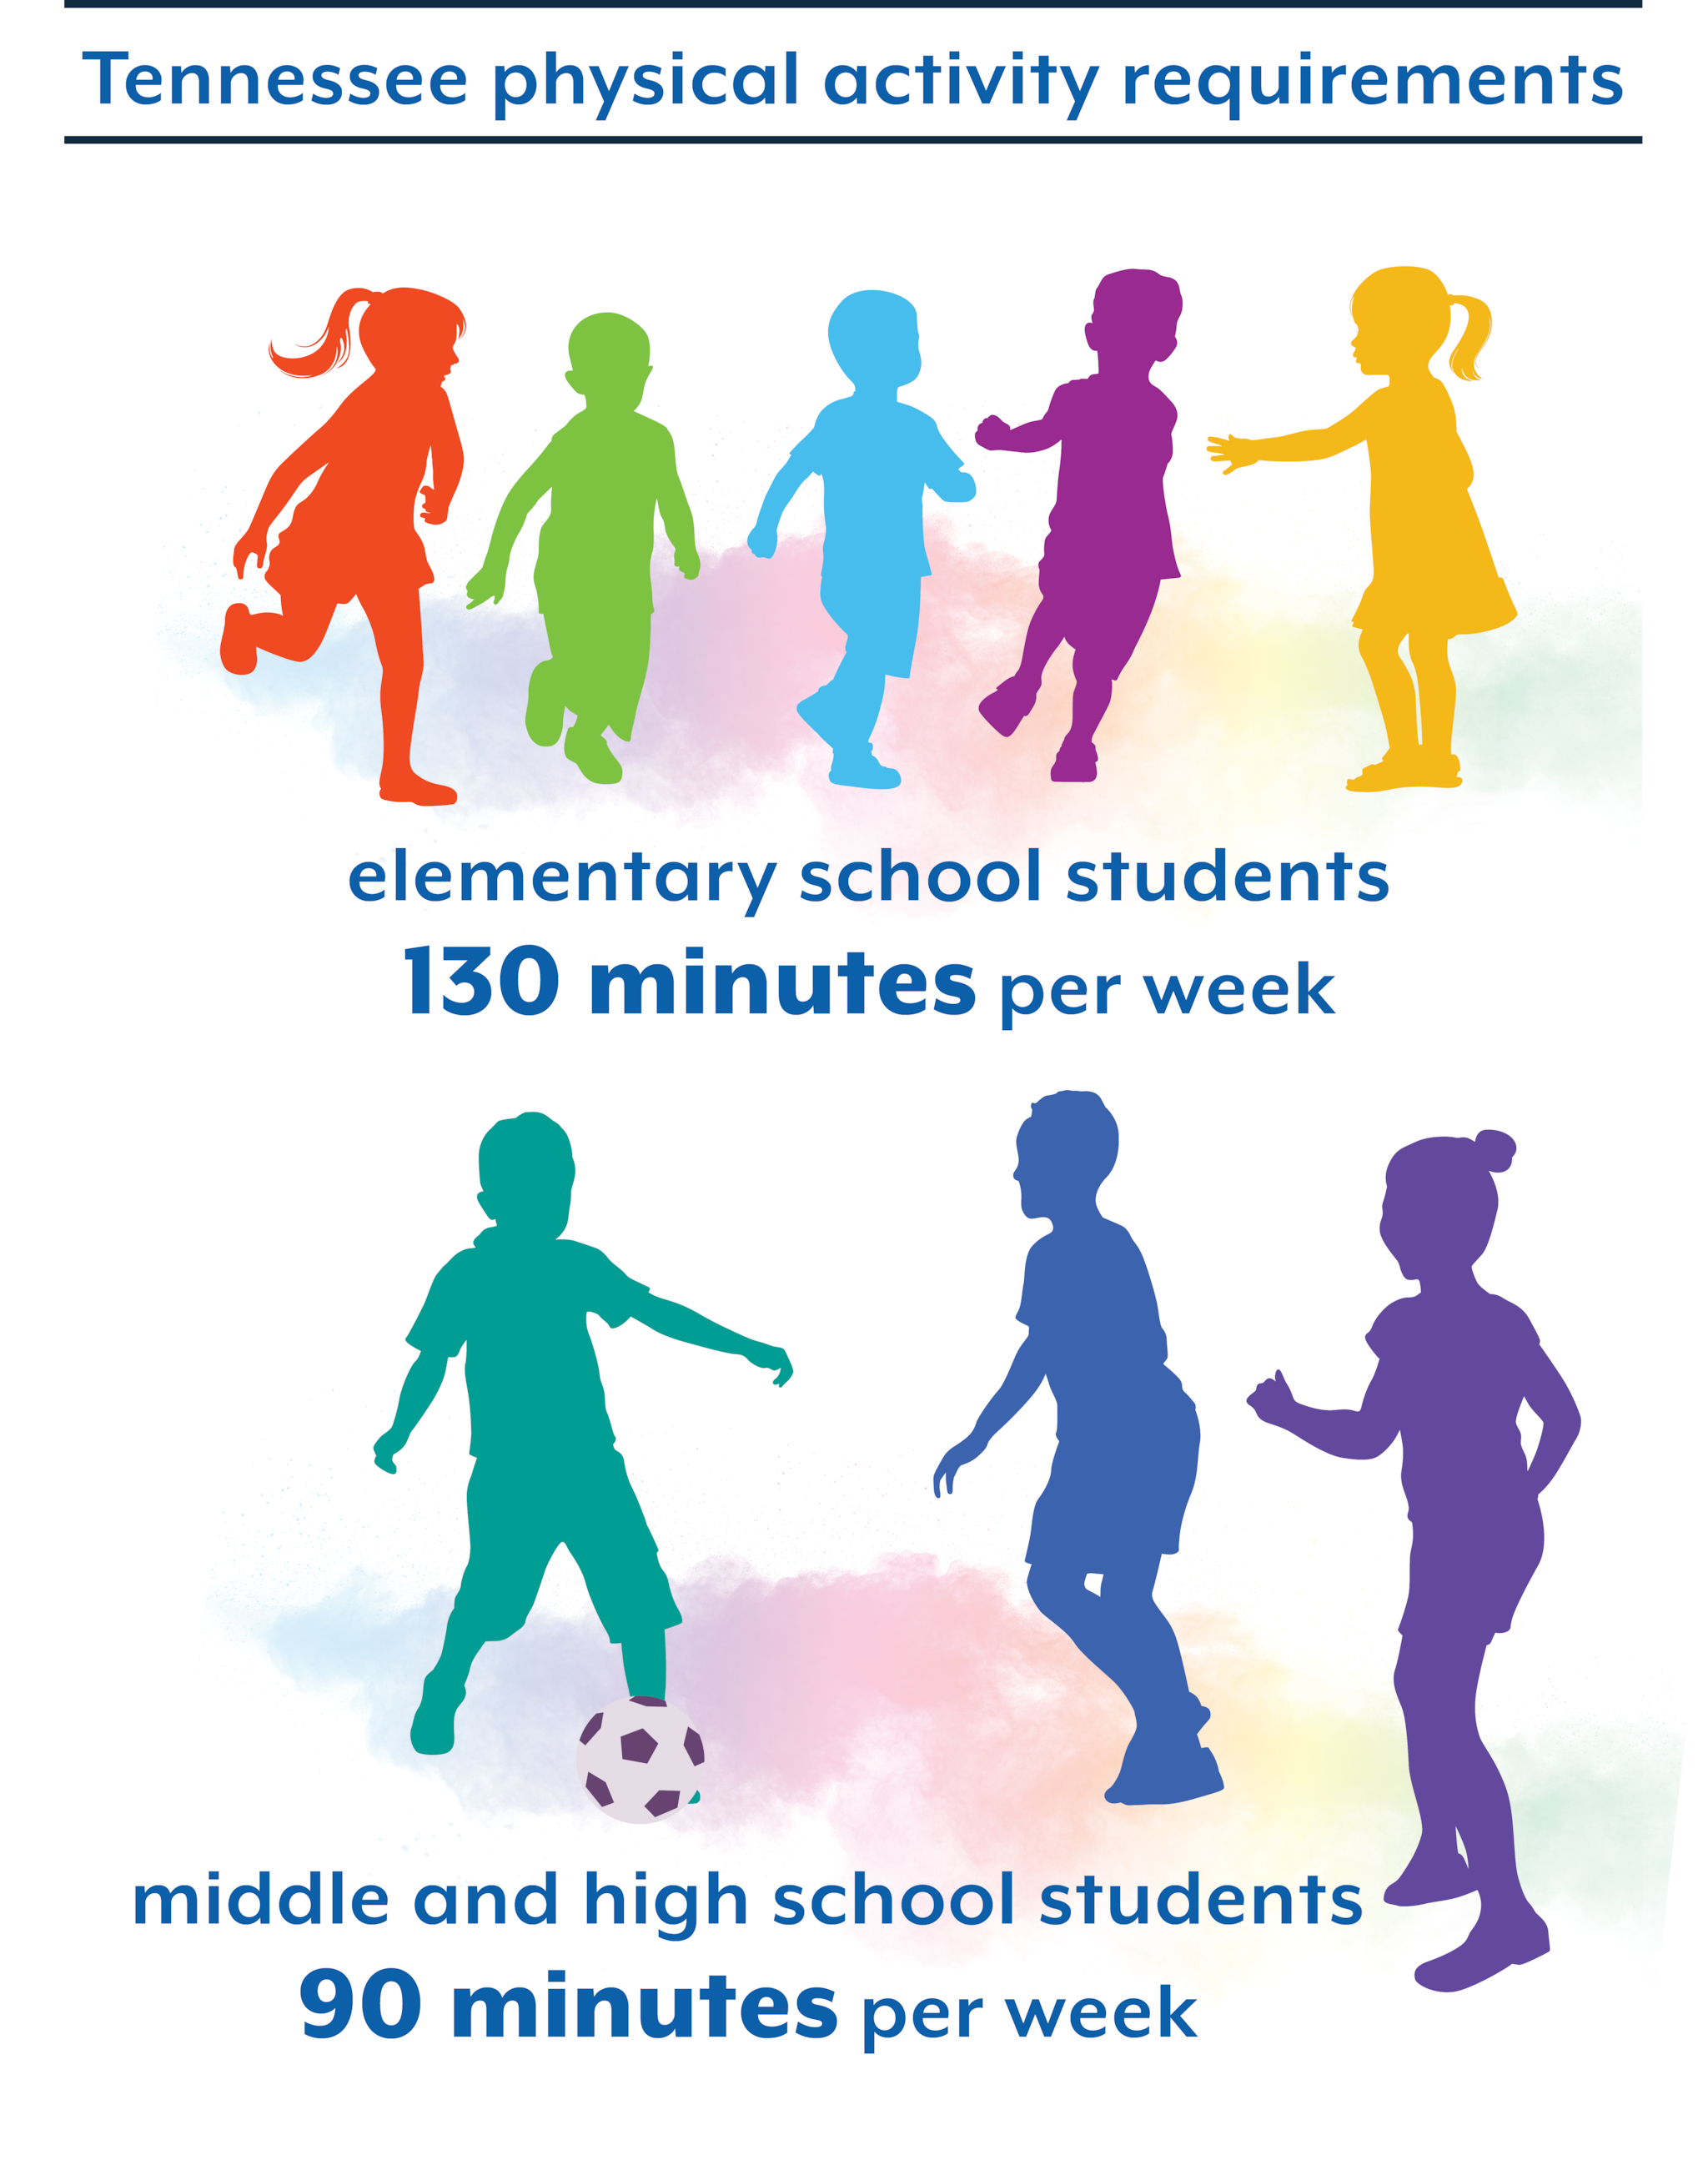 Tennessee physical activity requirements  elementary school students  130 minutes per week  middle and high school students  90 minutes per week